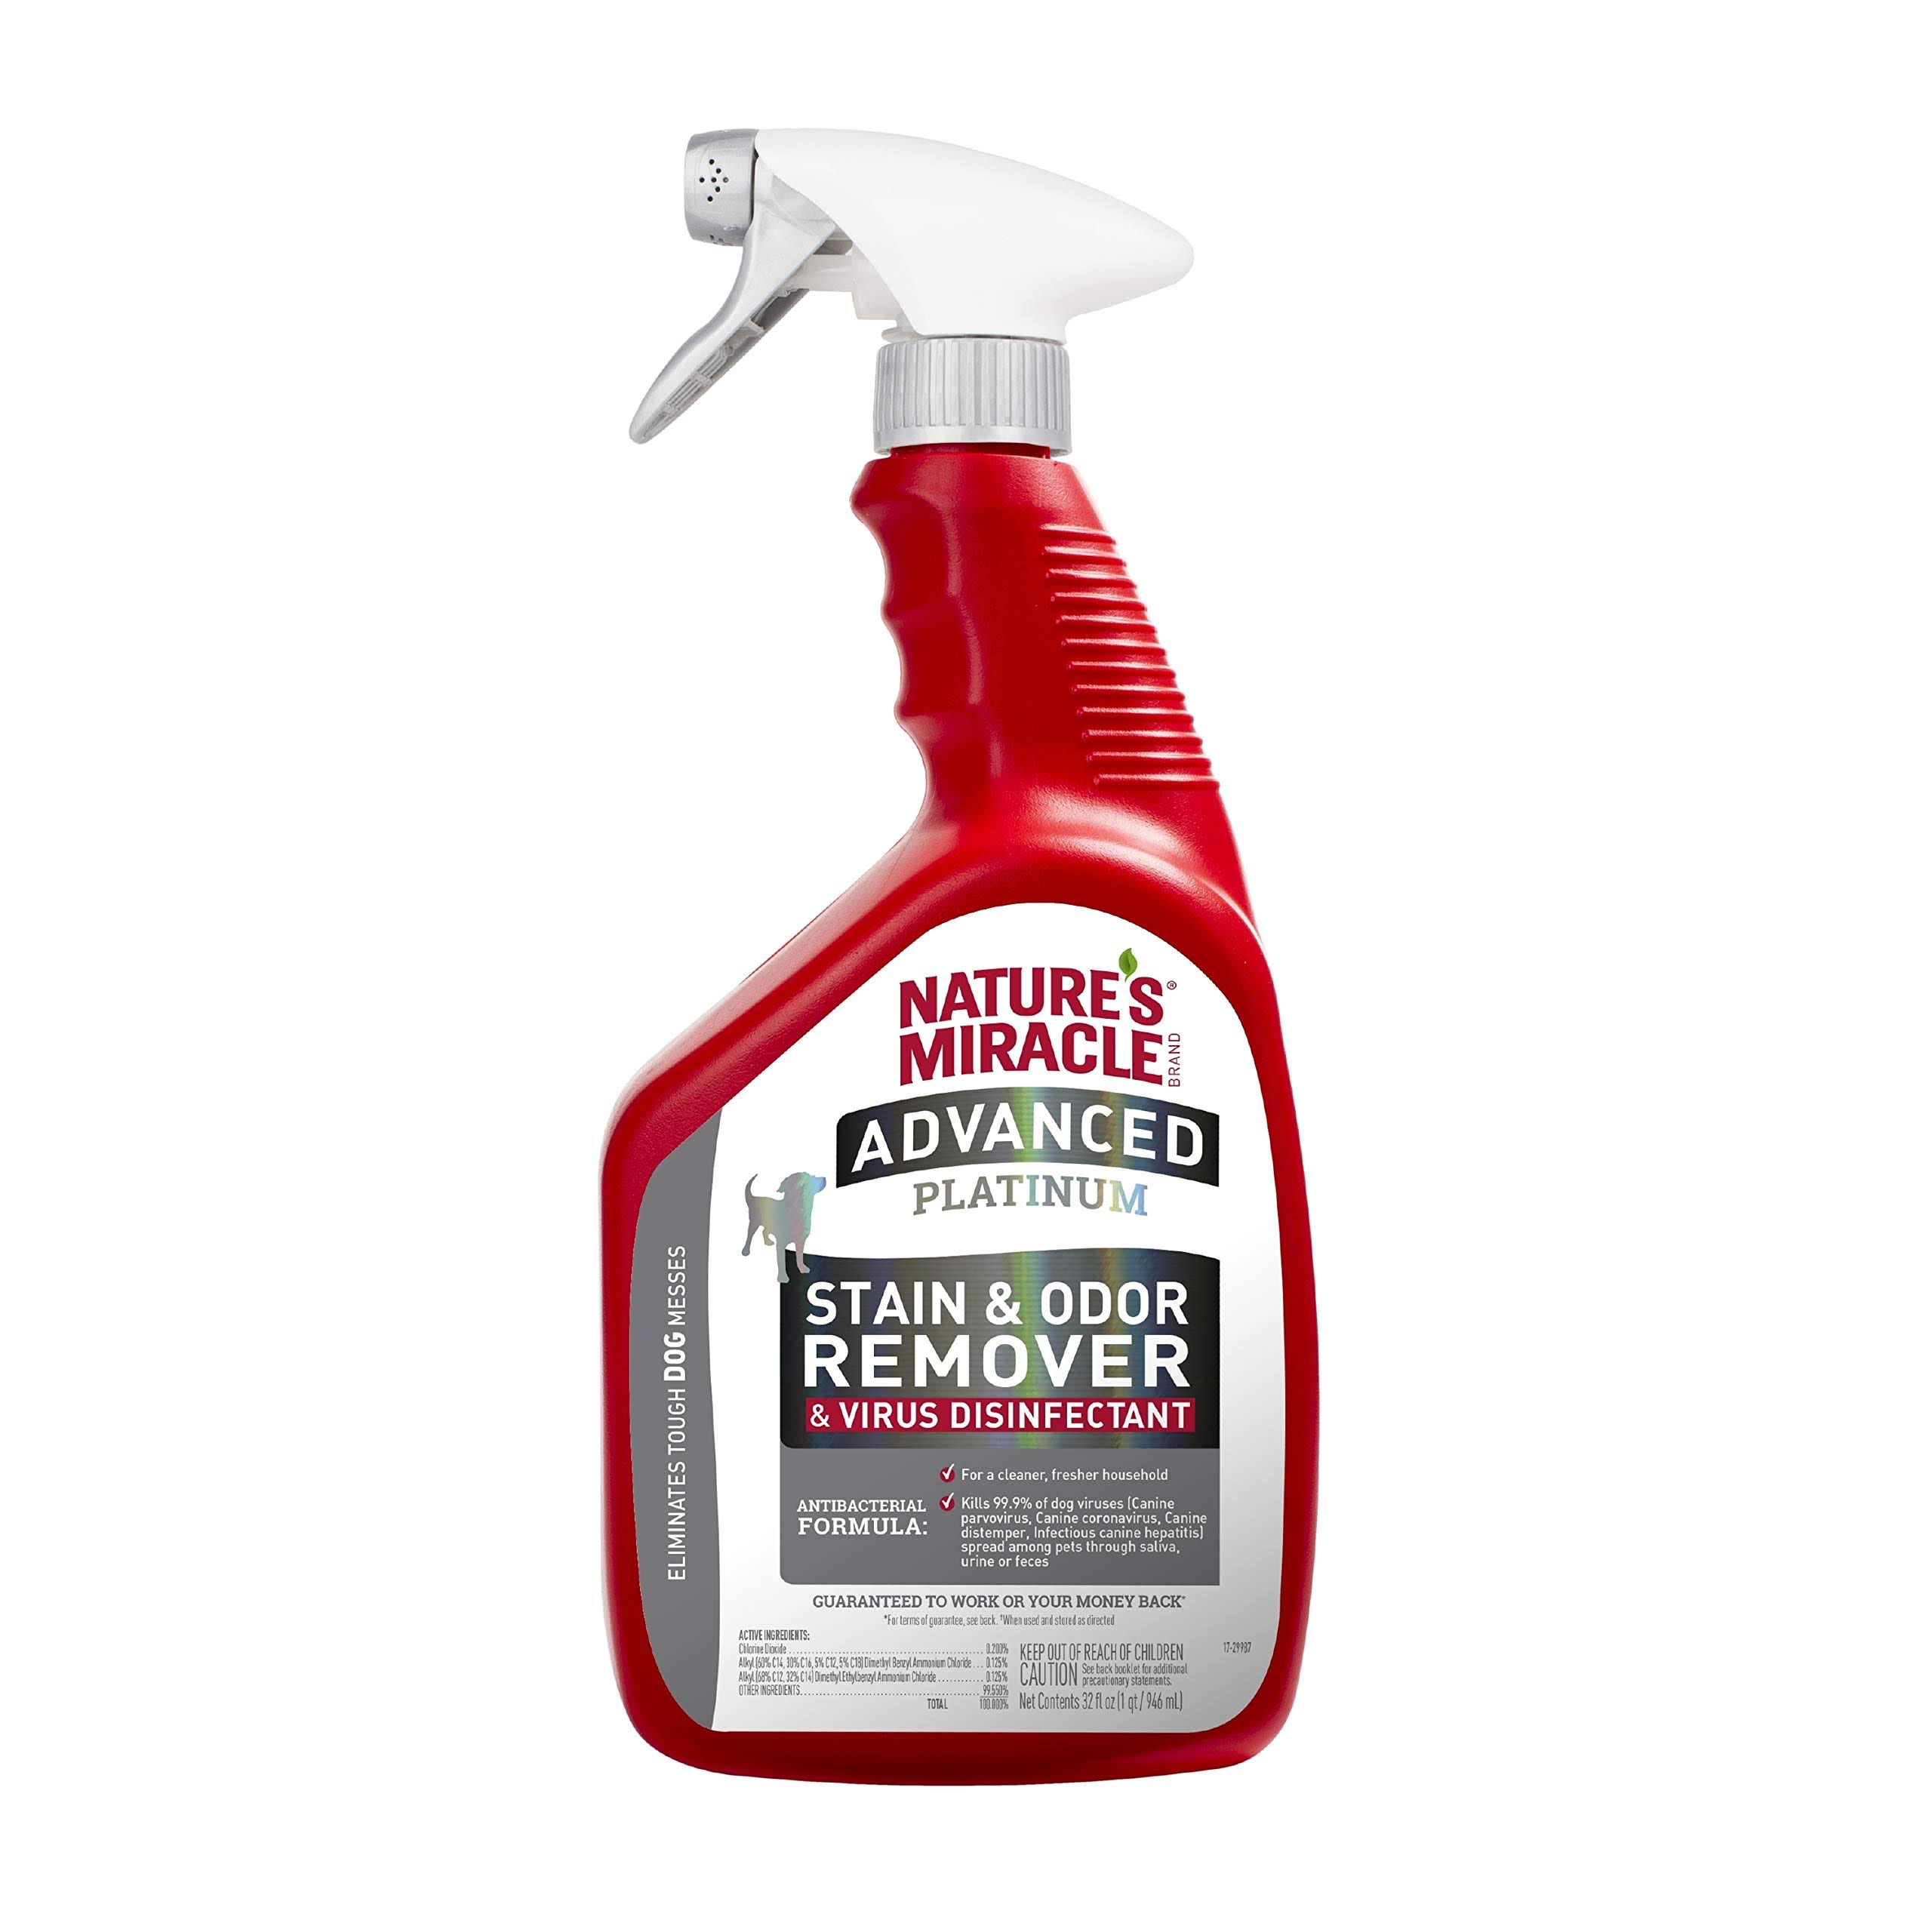 Nature's Miracle Advanced Platinum Stain & Odor Remover & Virus Disinfectant (32 oz)